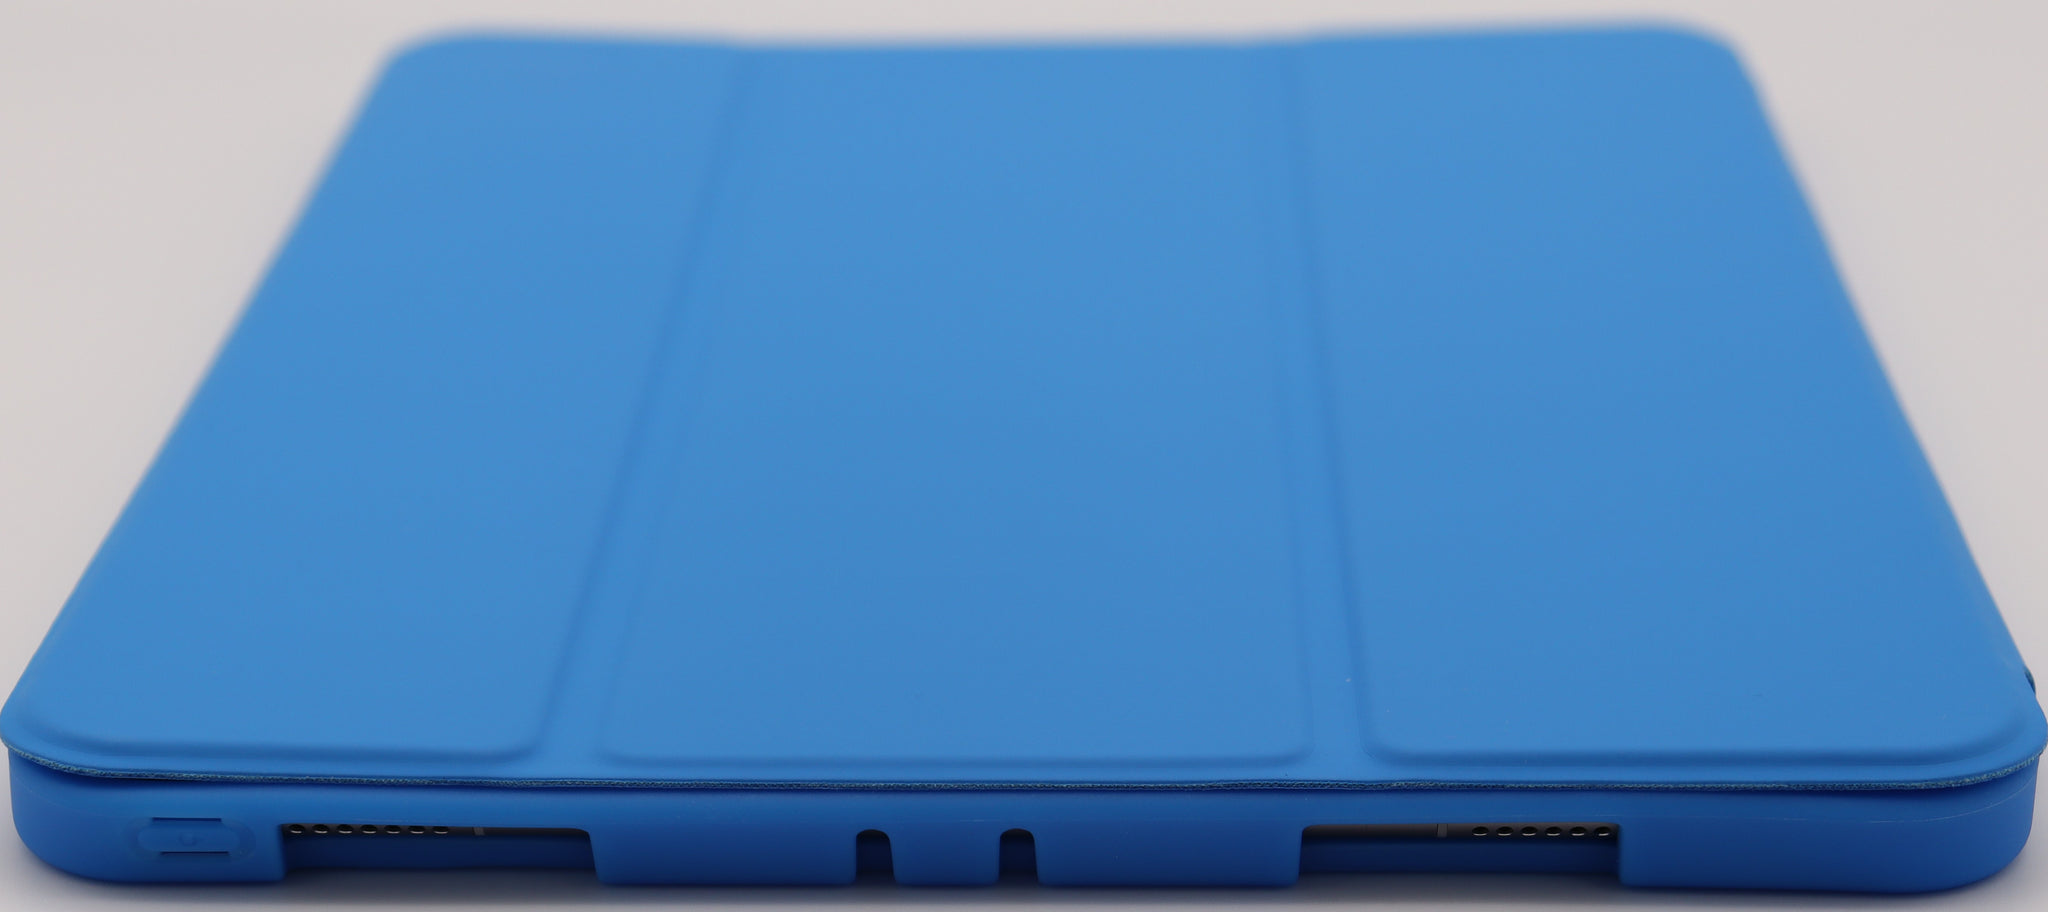 Flexy - iPad Cover with Pen Slot for iPad Pro 2020 11 or 12.9 inch models